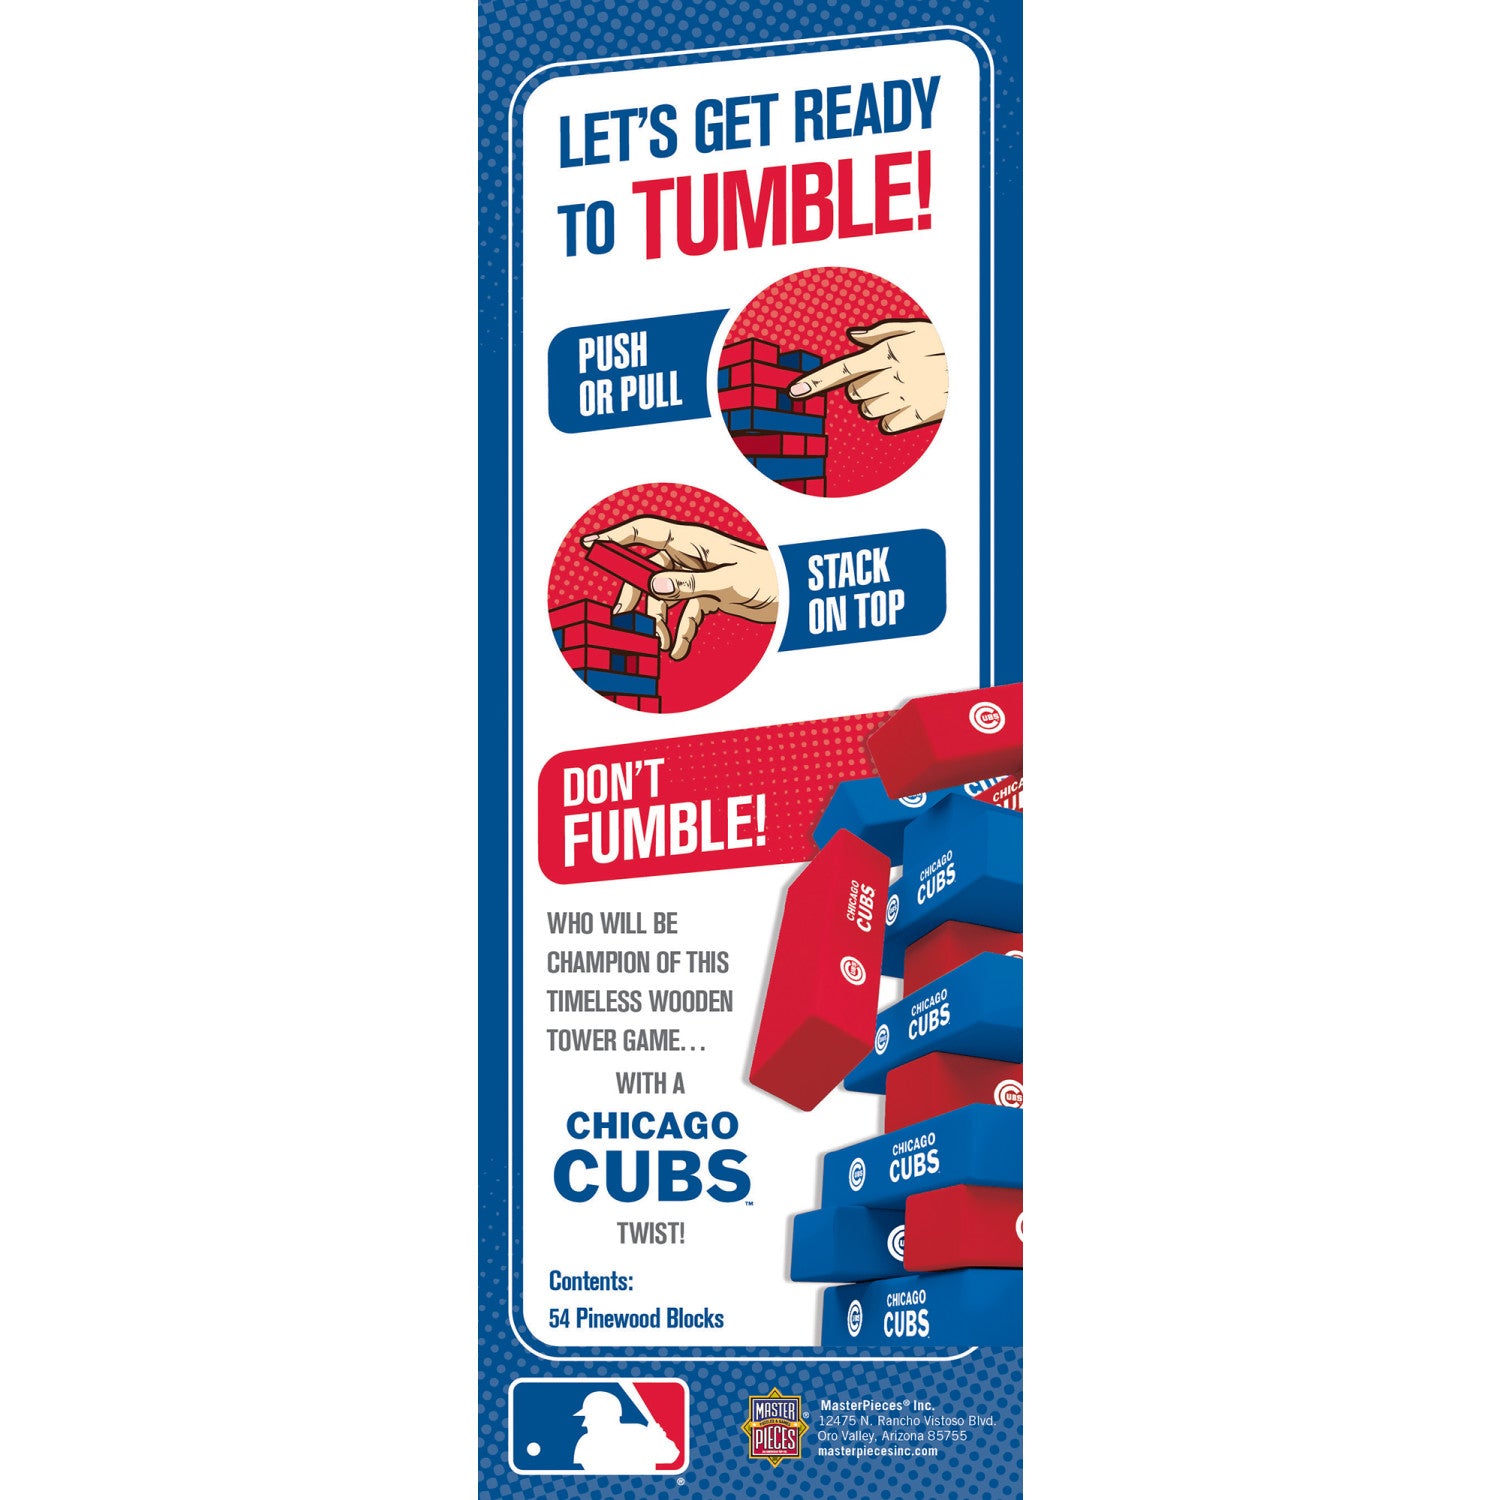 Chicago Cubs Tumble Tower